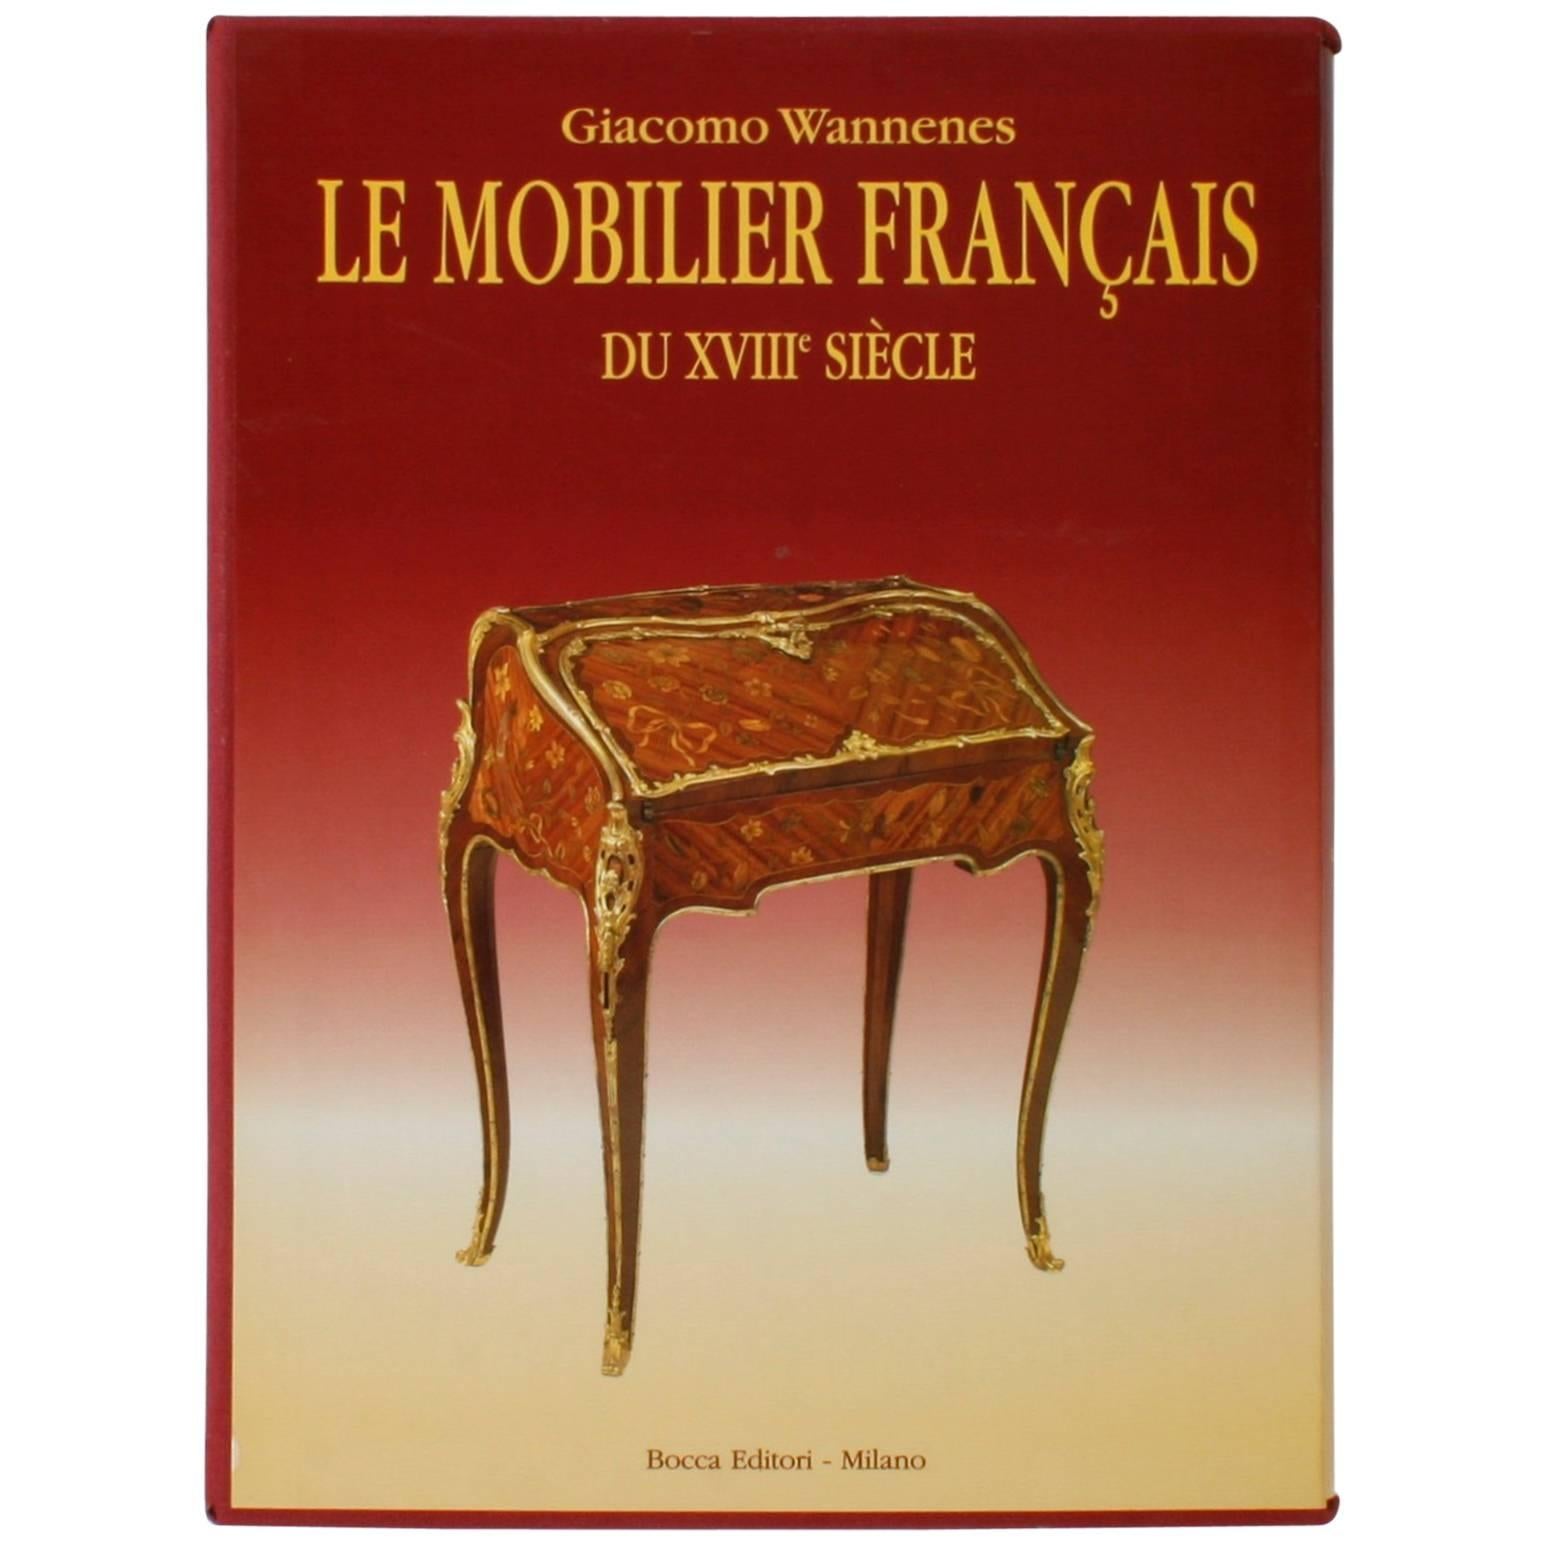 Le Mobilier Francais Du XVIII Siecle Limited/Numbered, (430/1200) 1st Ed